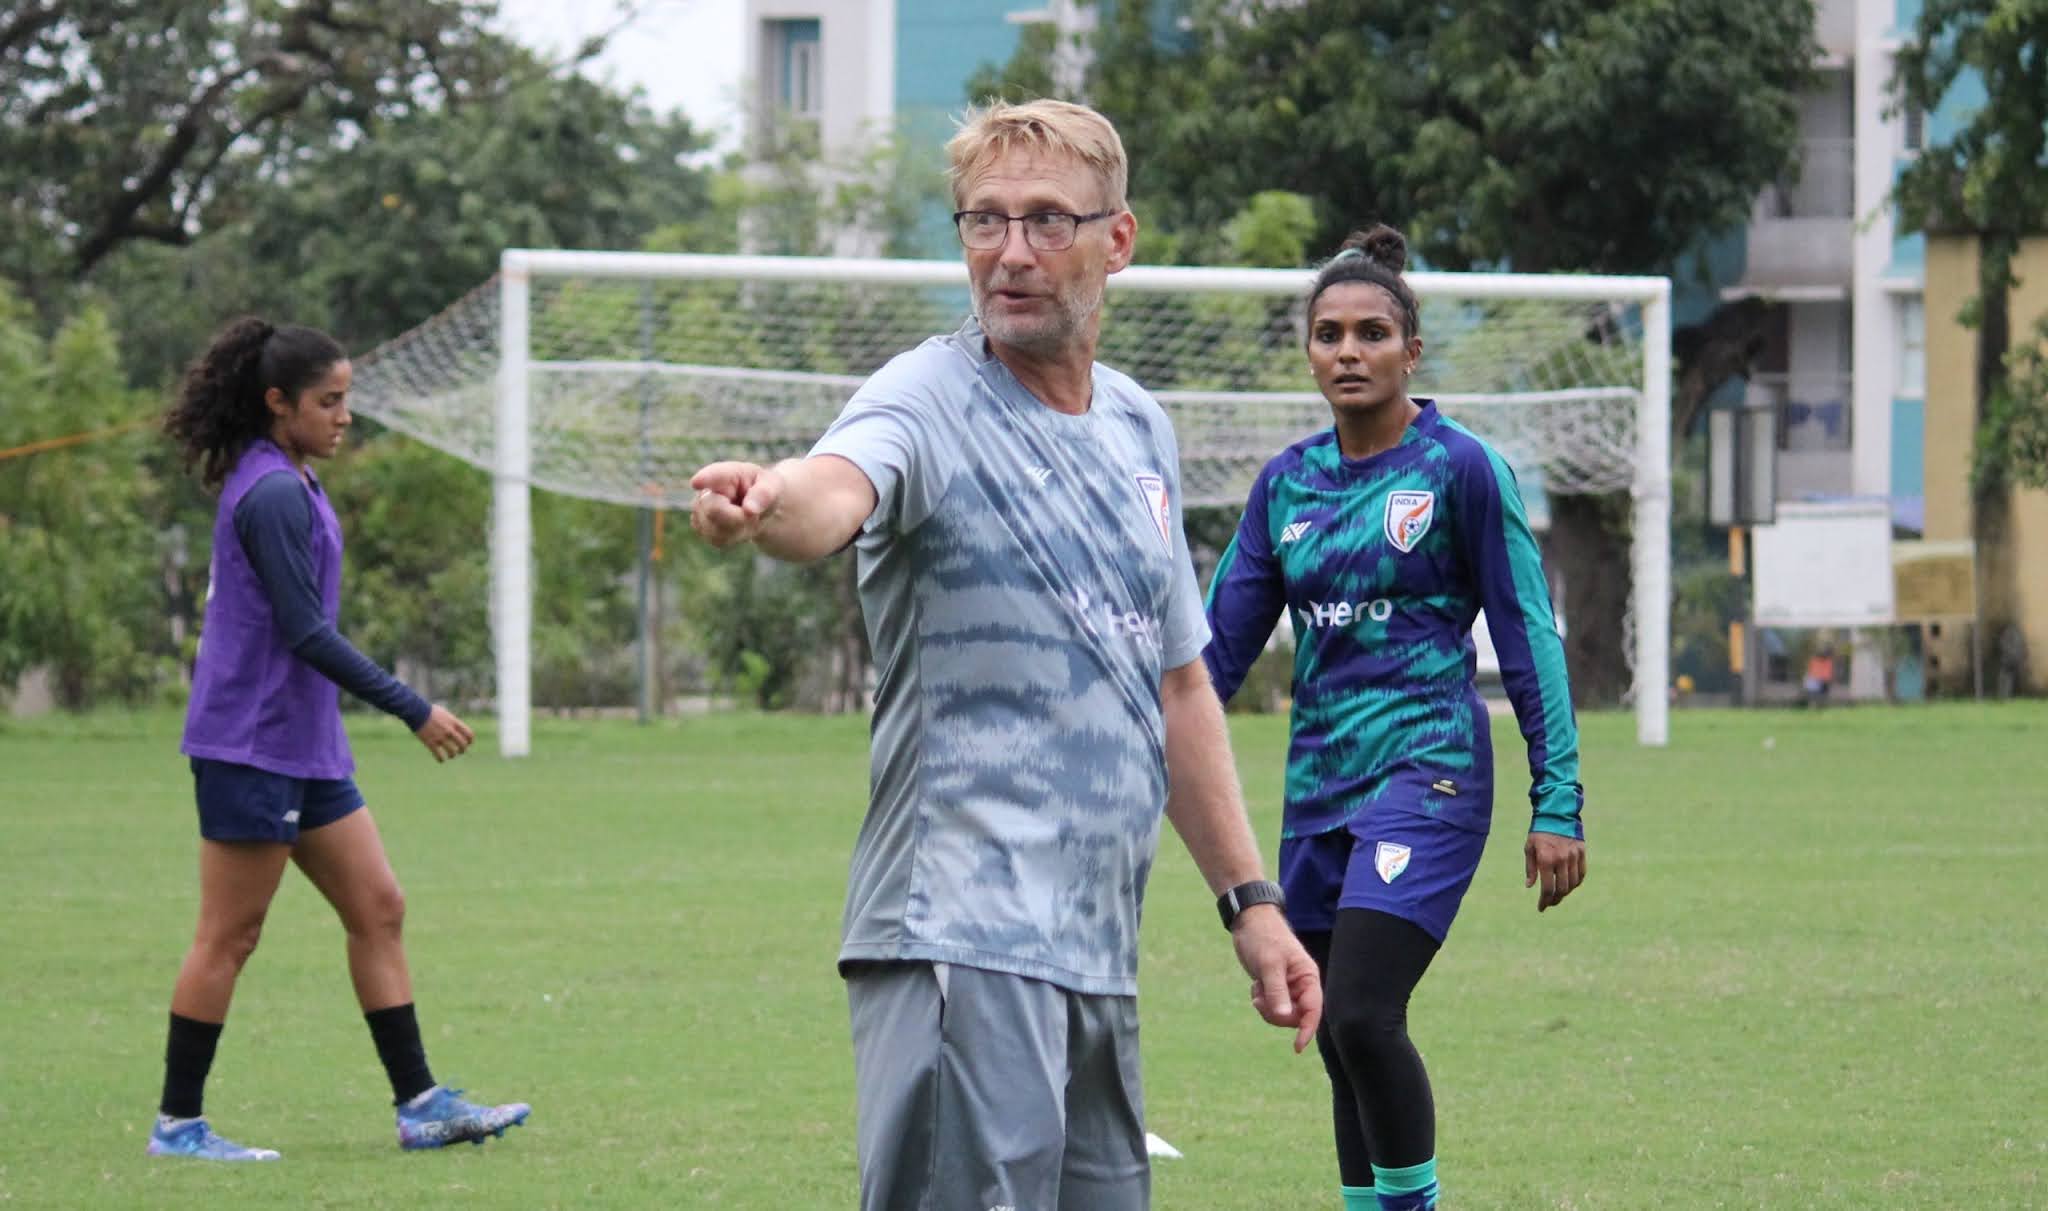 AFC Women’s Asian Cup 2022: Primary target is to reach the quarterfinals, says India’s head coach Thomas Dennerby